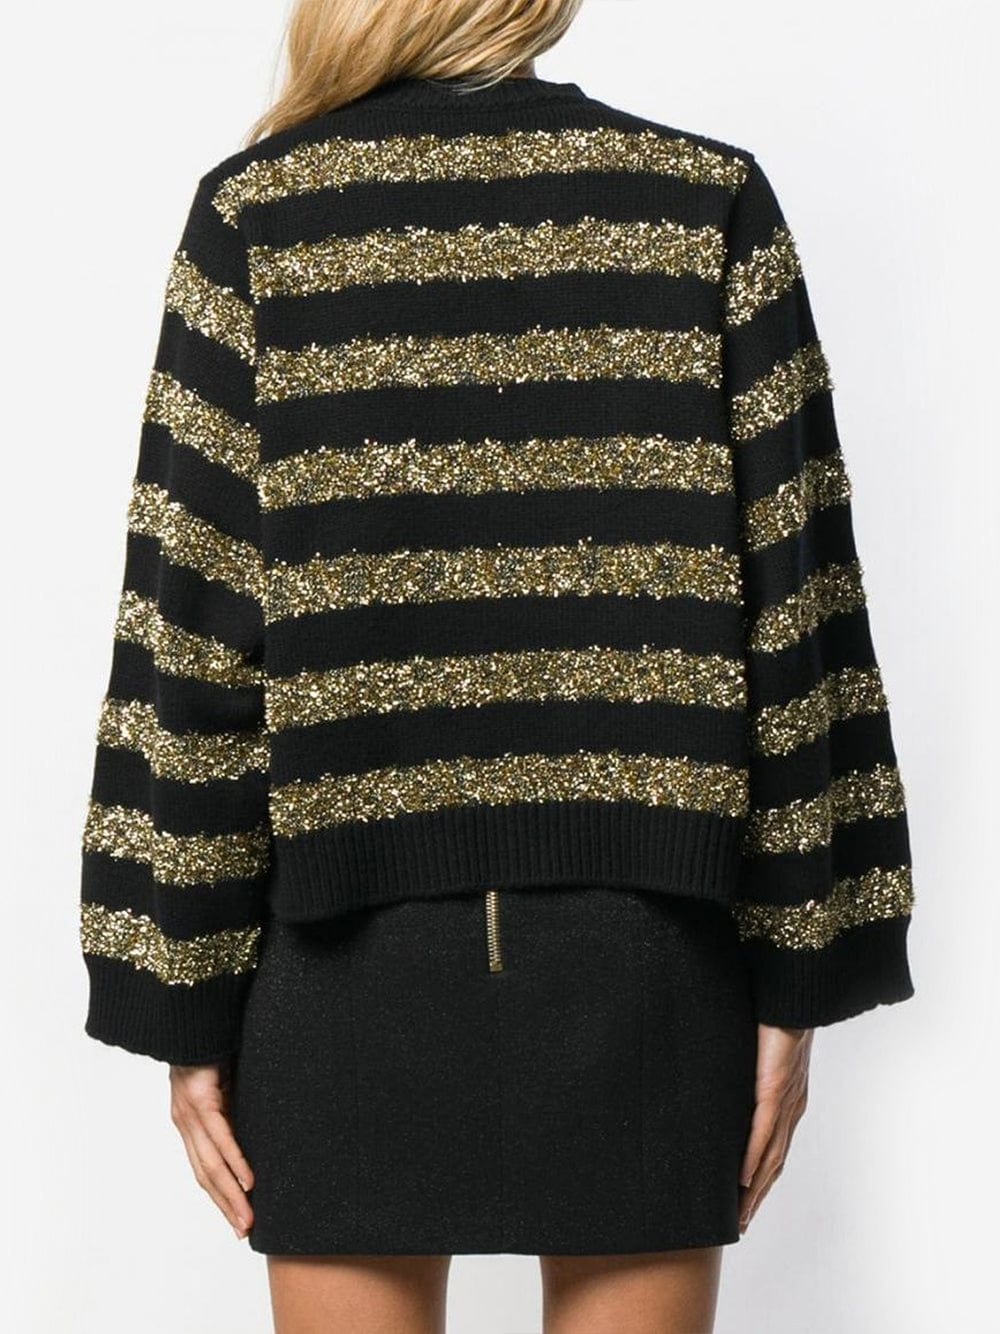 Dolce & Gabbana Sequined Striped Knit Sweater